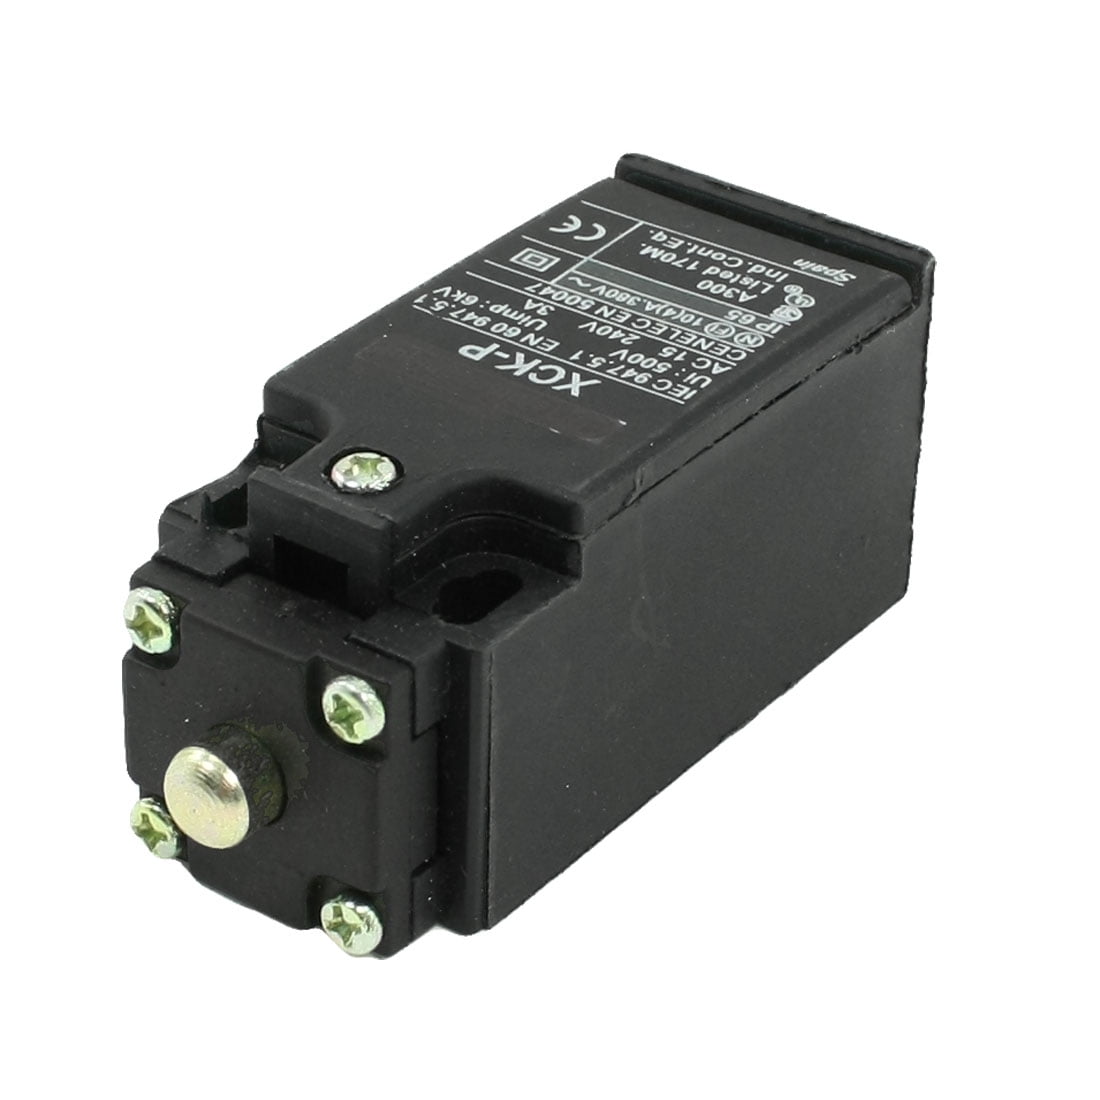 Xck-p145 Black Momentary Rotary Adjustable Roller Lever Limit Switch AC 380v 4a for sale online 